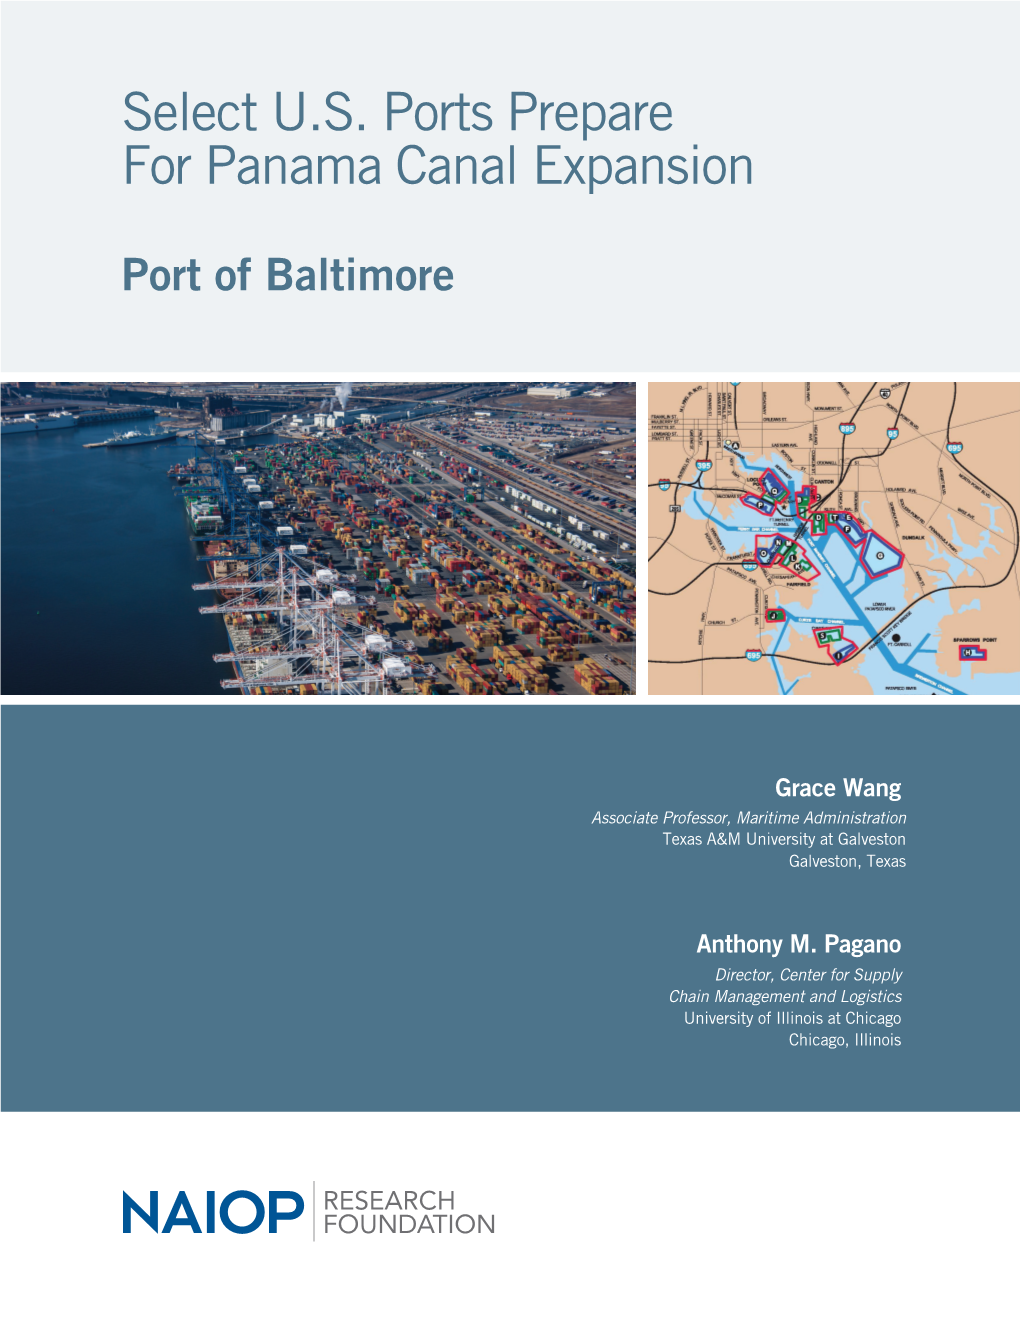 Select U.S. Ports Prepare for Panama Canal Expansion